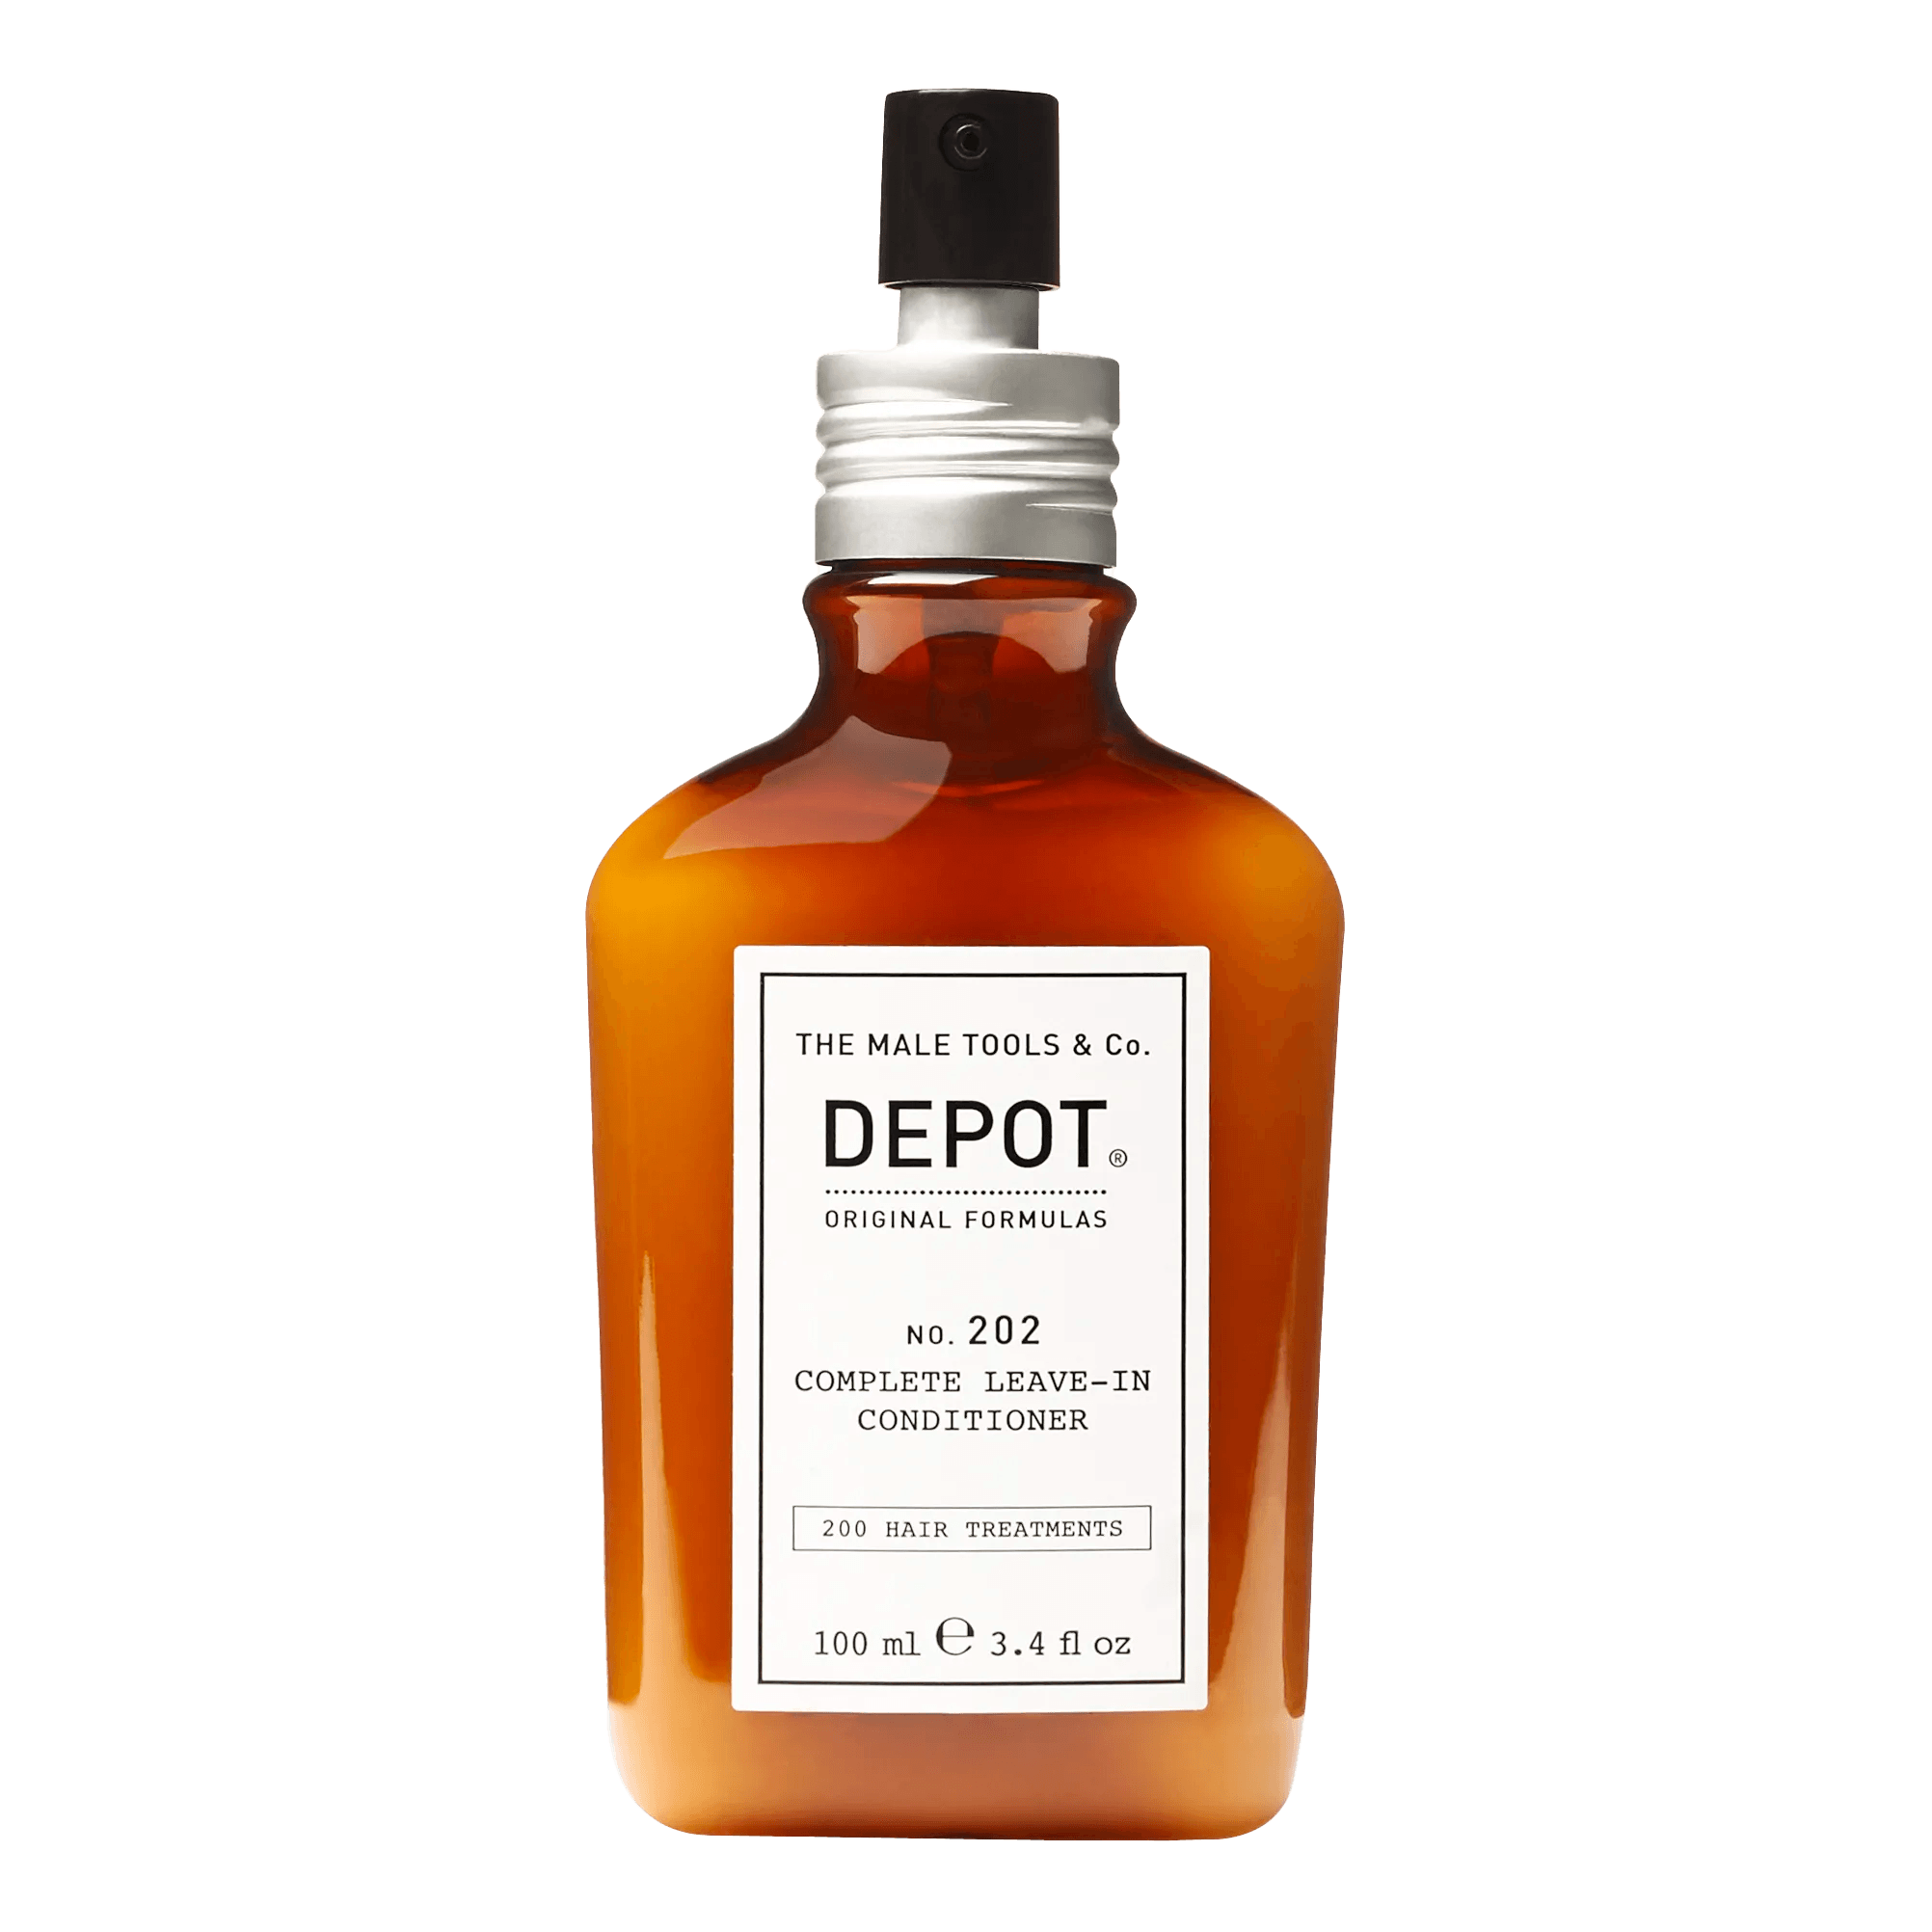 Depot No. 202 Complete Leave-in conditioner